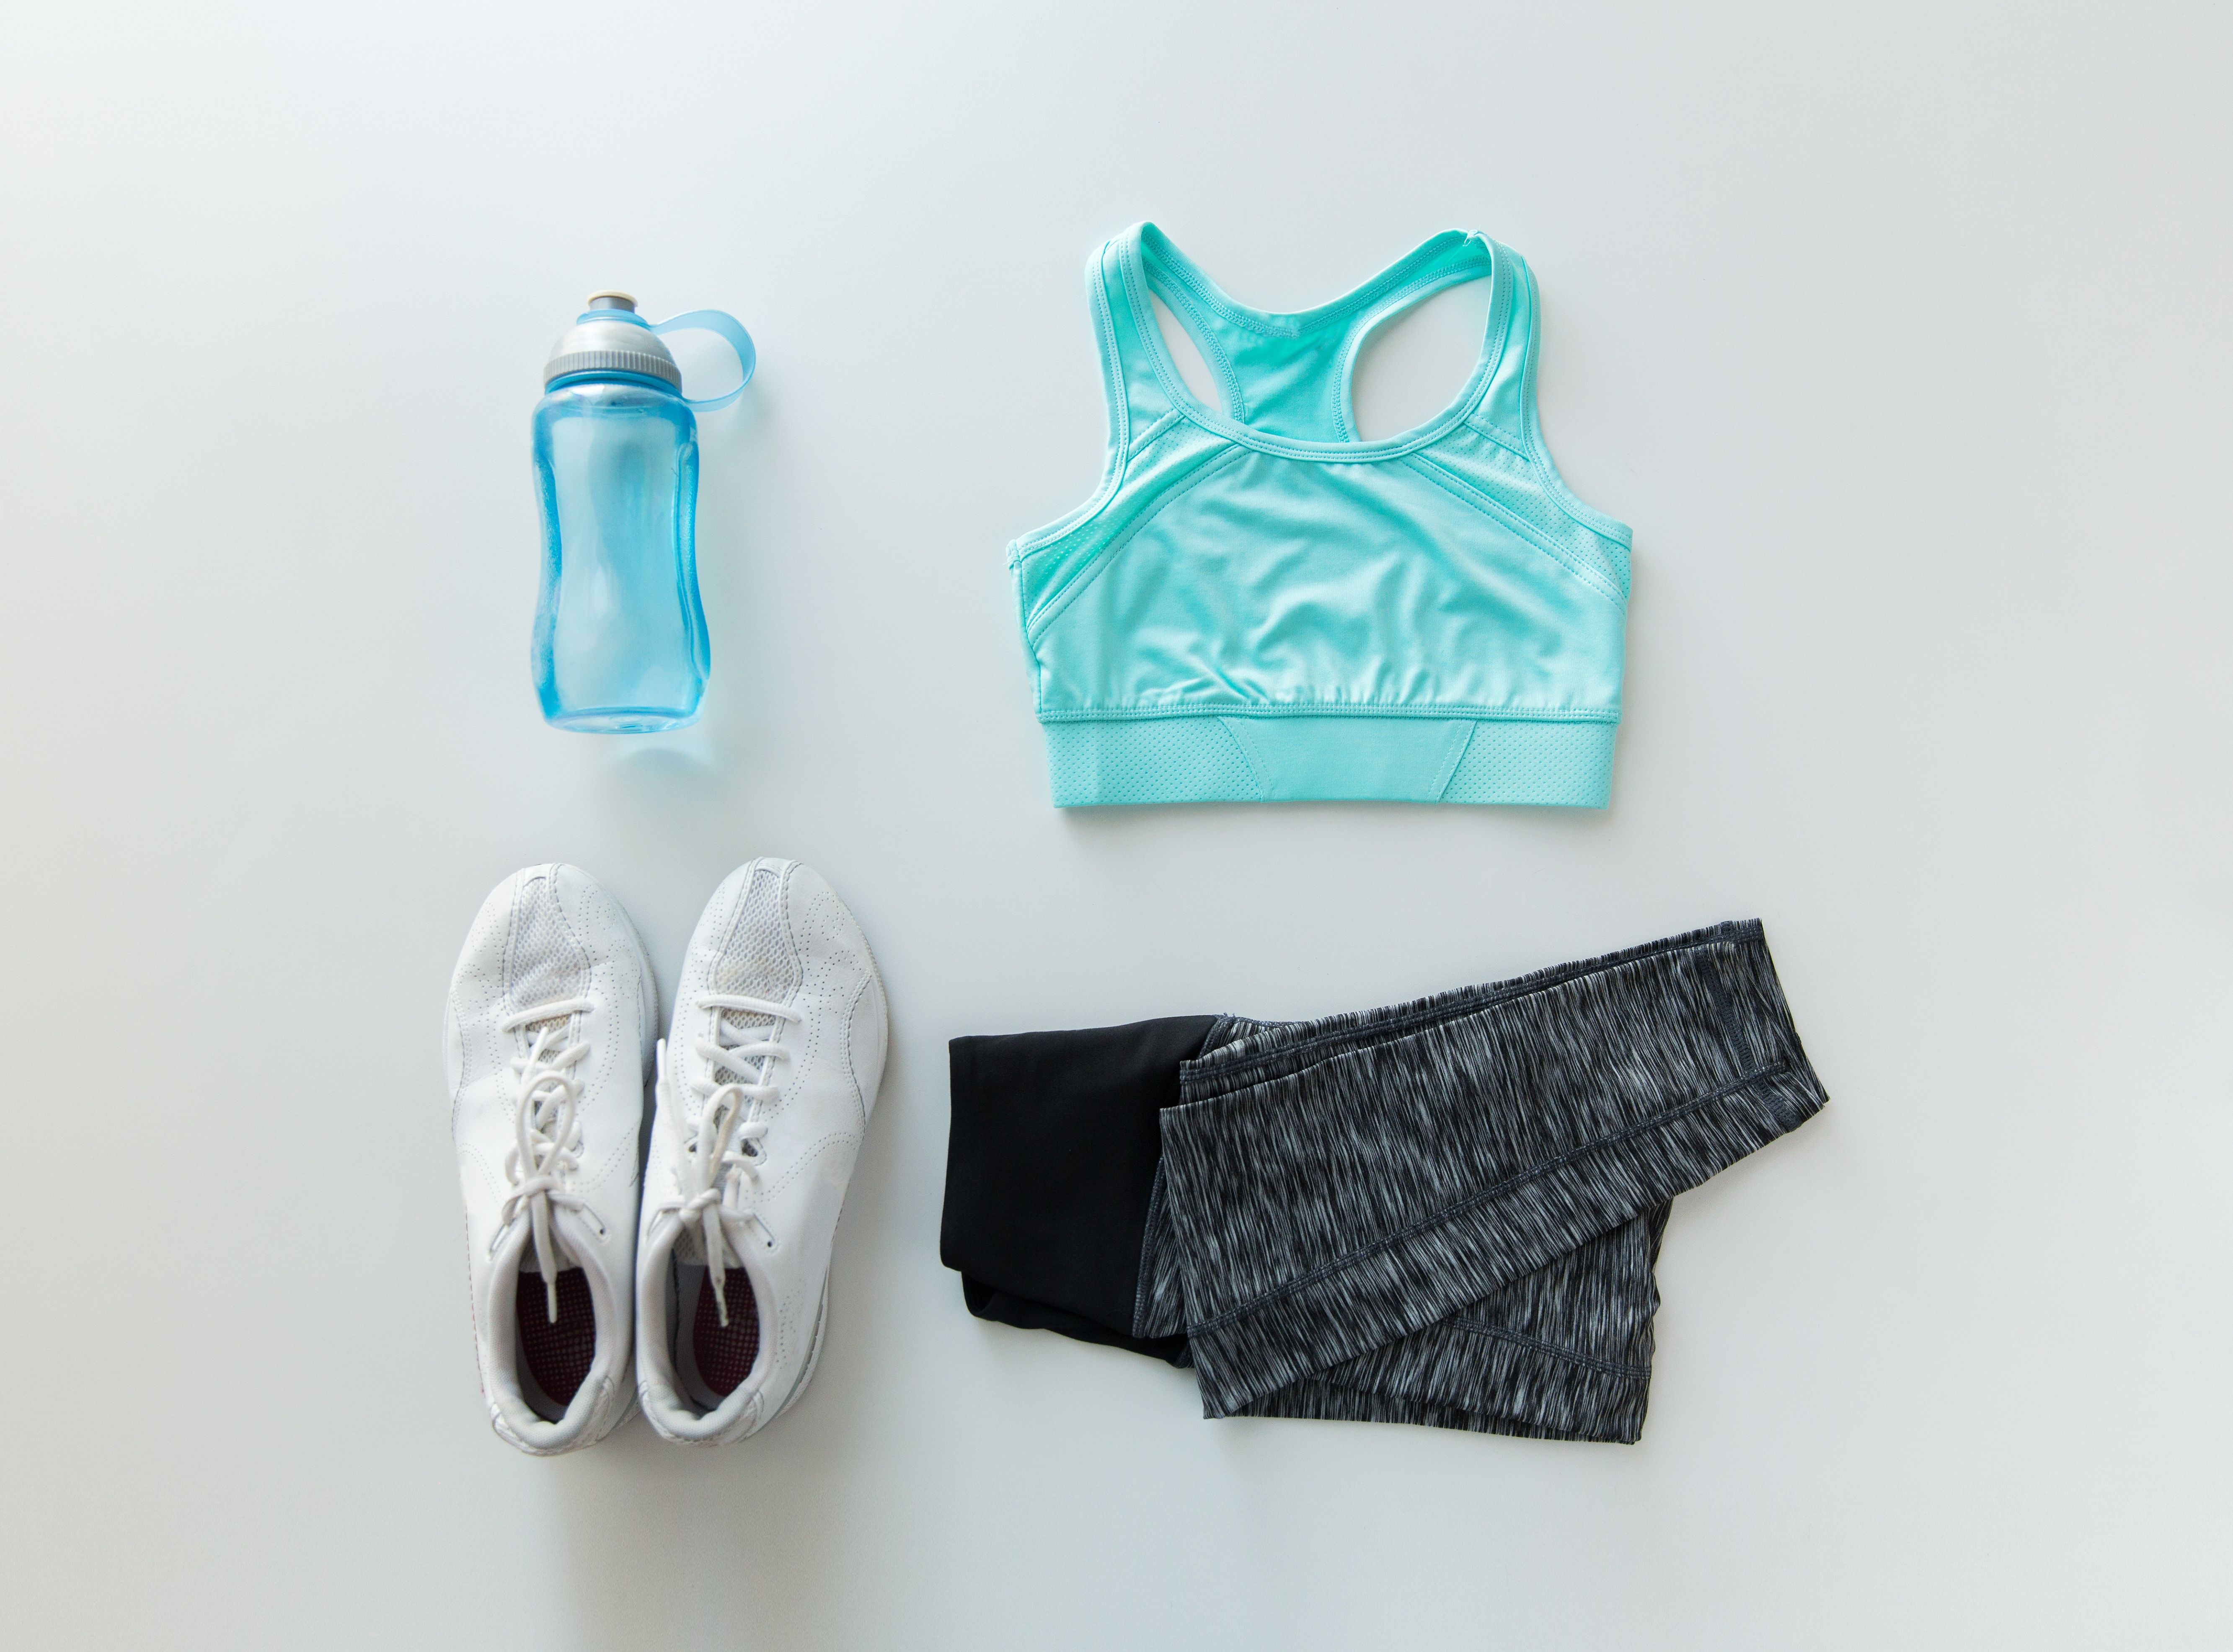 Where to find great workout clothes that won't drain your wallet